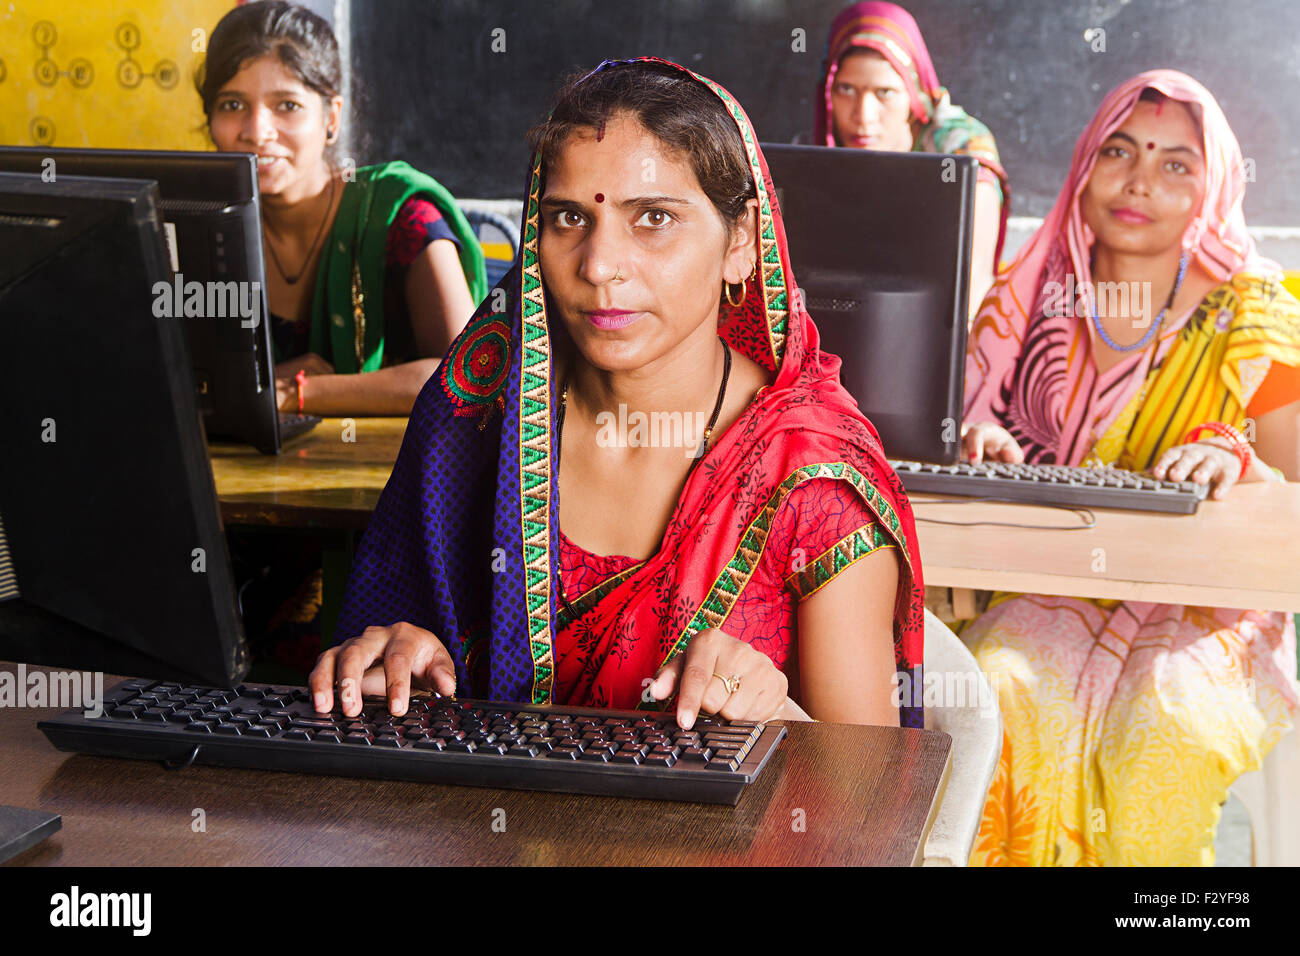 4 indian rural Villager womans School Computer Education Stock Photo